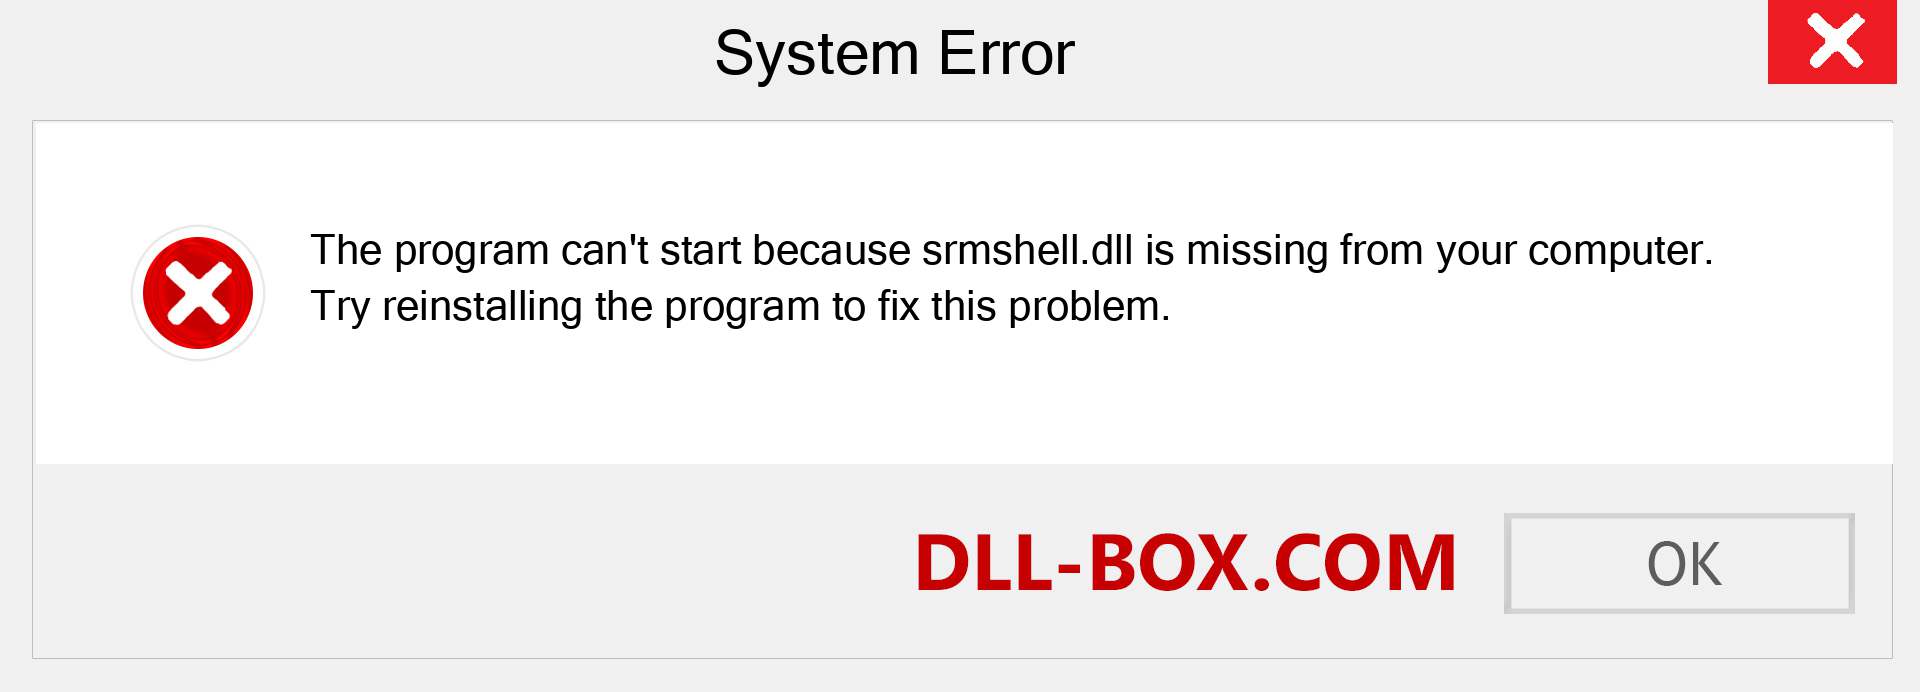  srmshell.dll file is missing?. Download for Windows 7, 8, 10 - Fix  srmshell dll Missing Error on Windows, photos, images